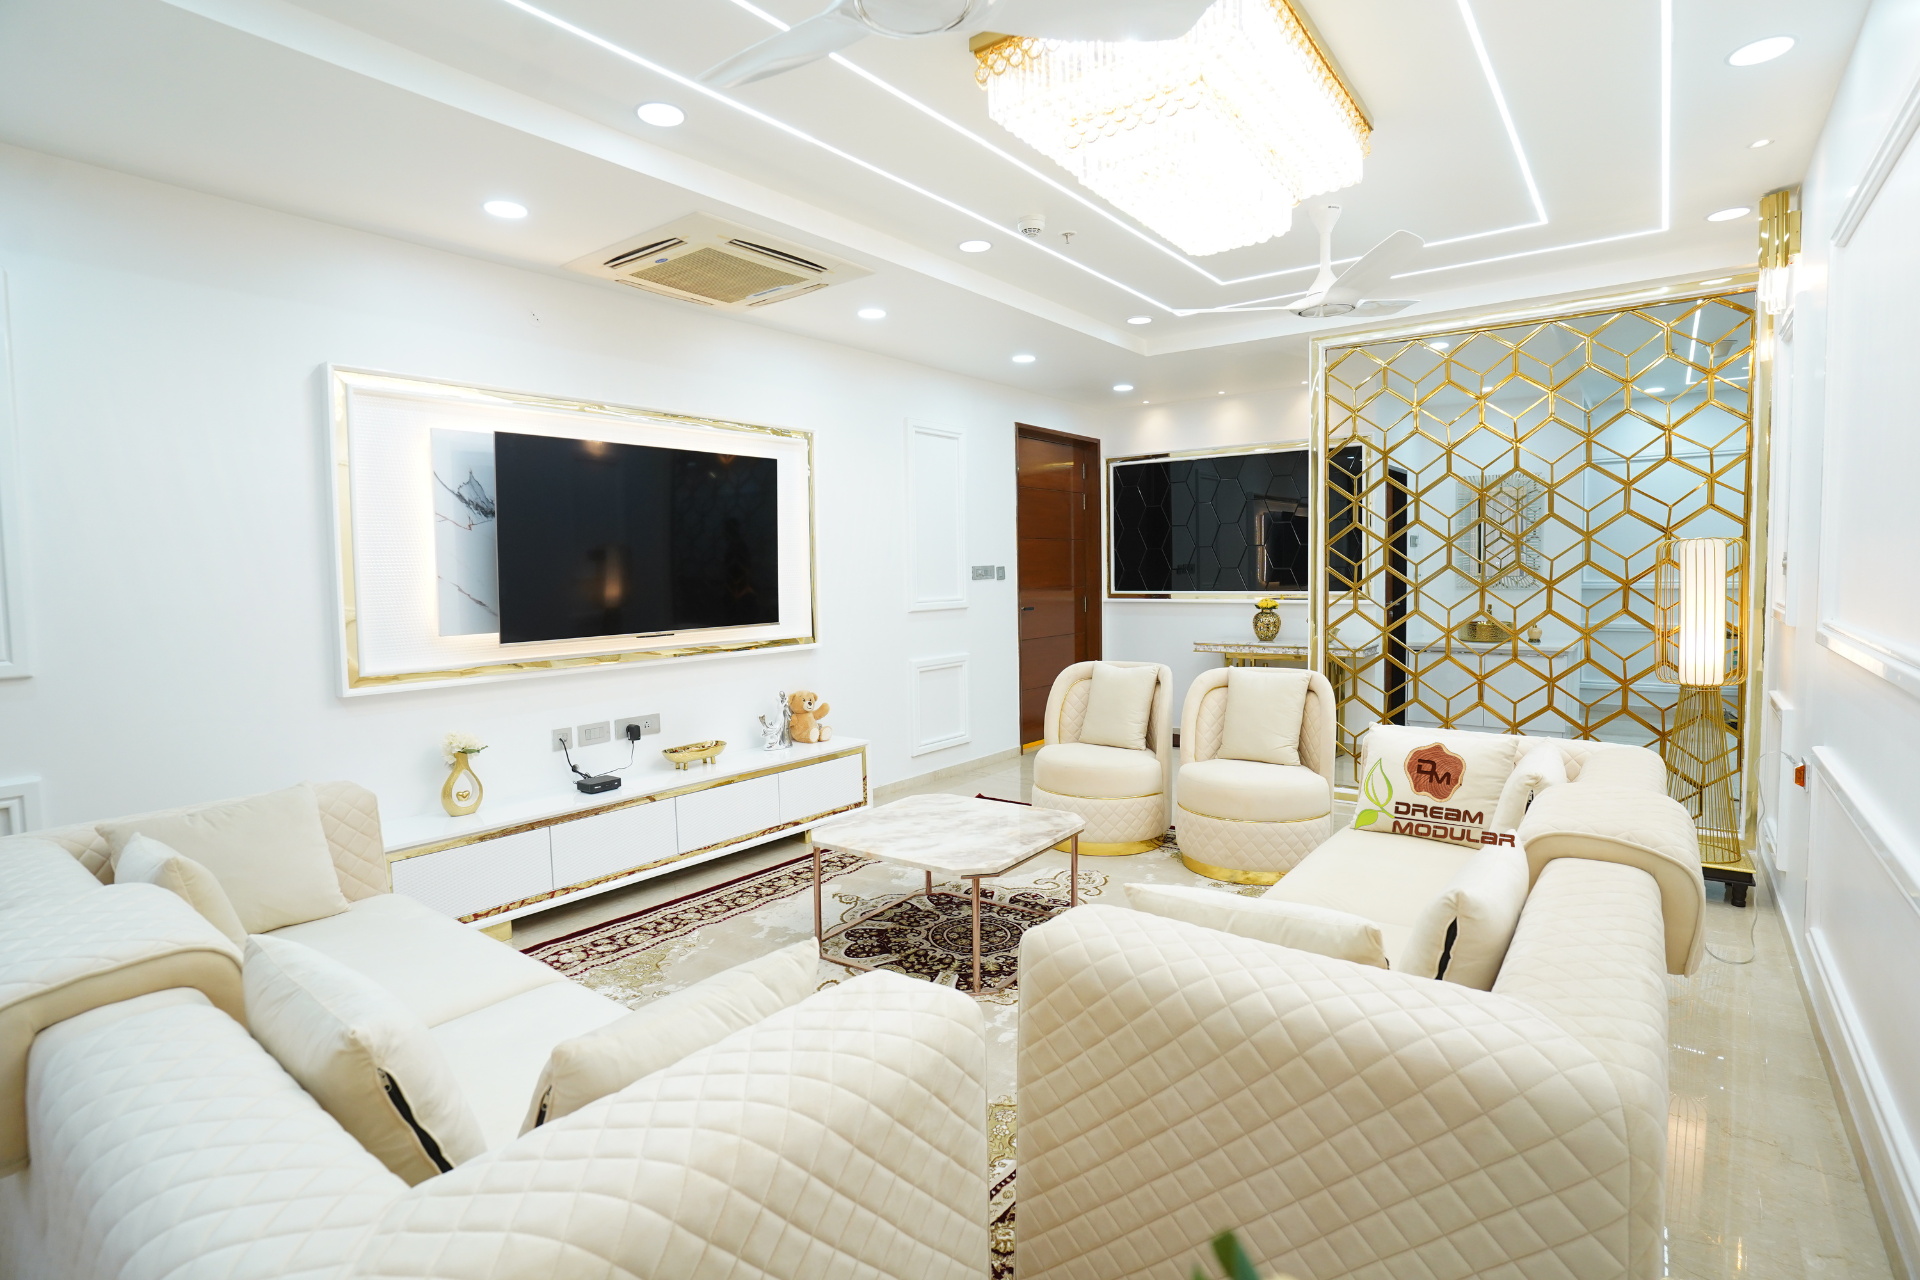 An elegant living room with white furniture and a TV, showcasing impeccable interior design.